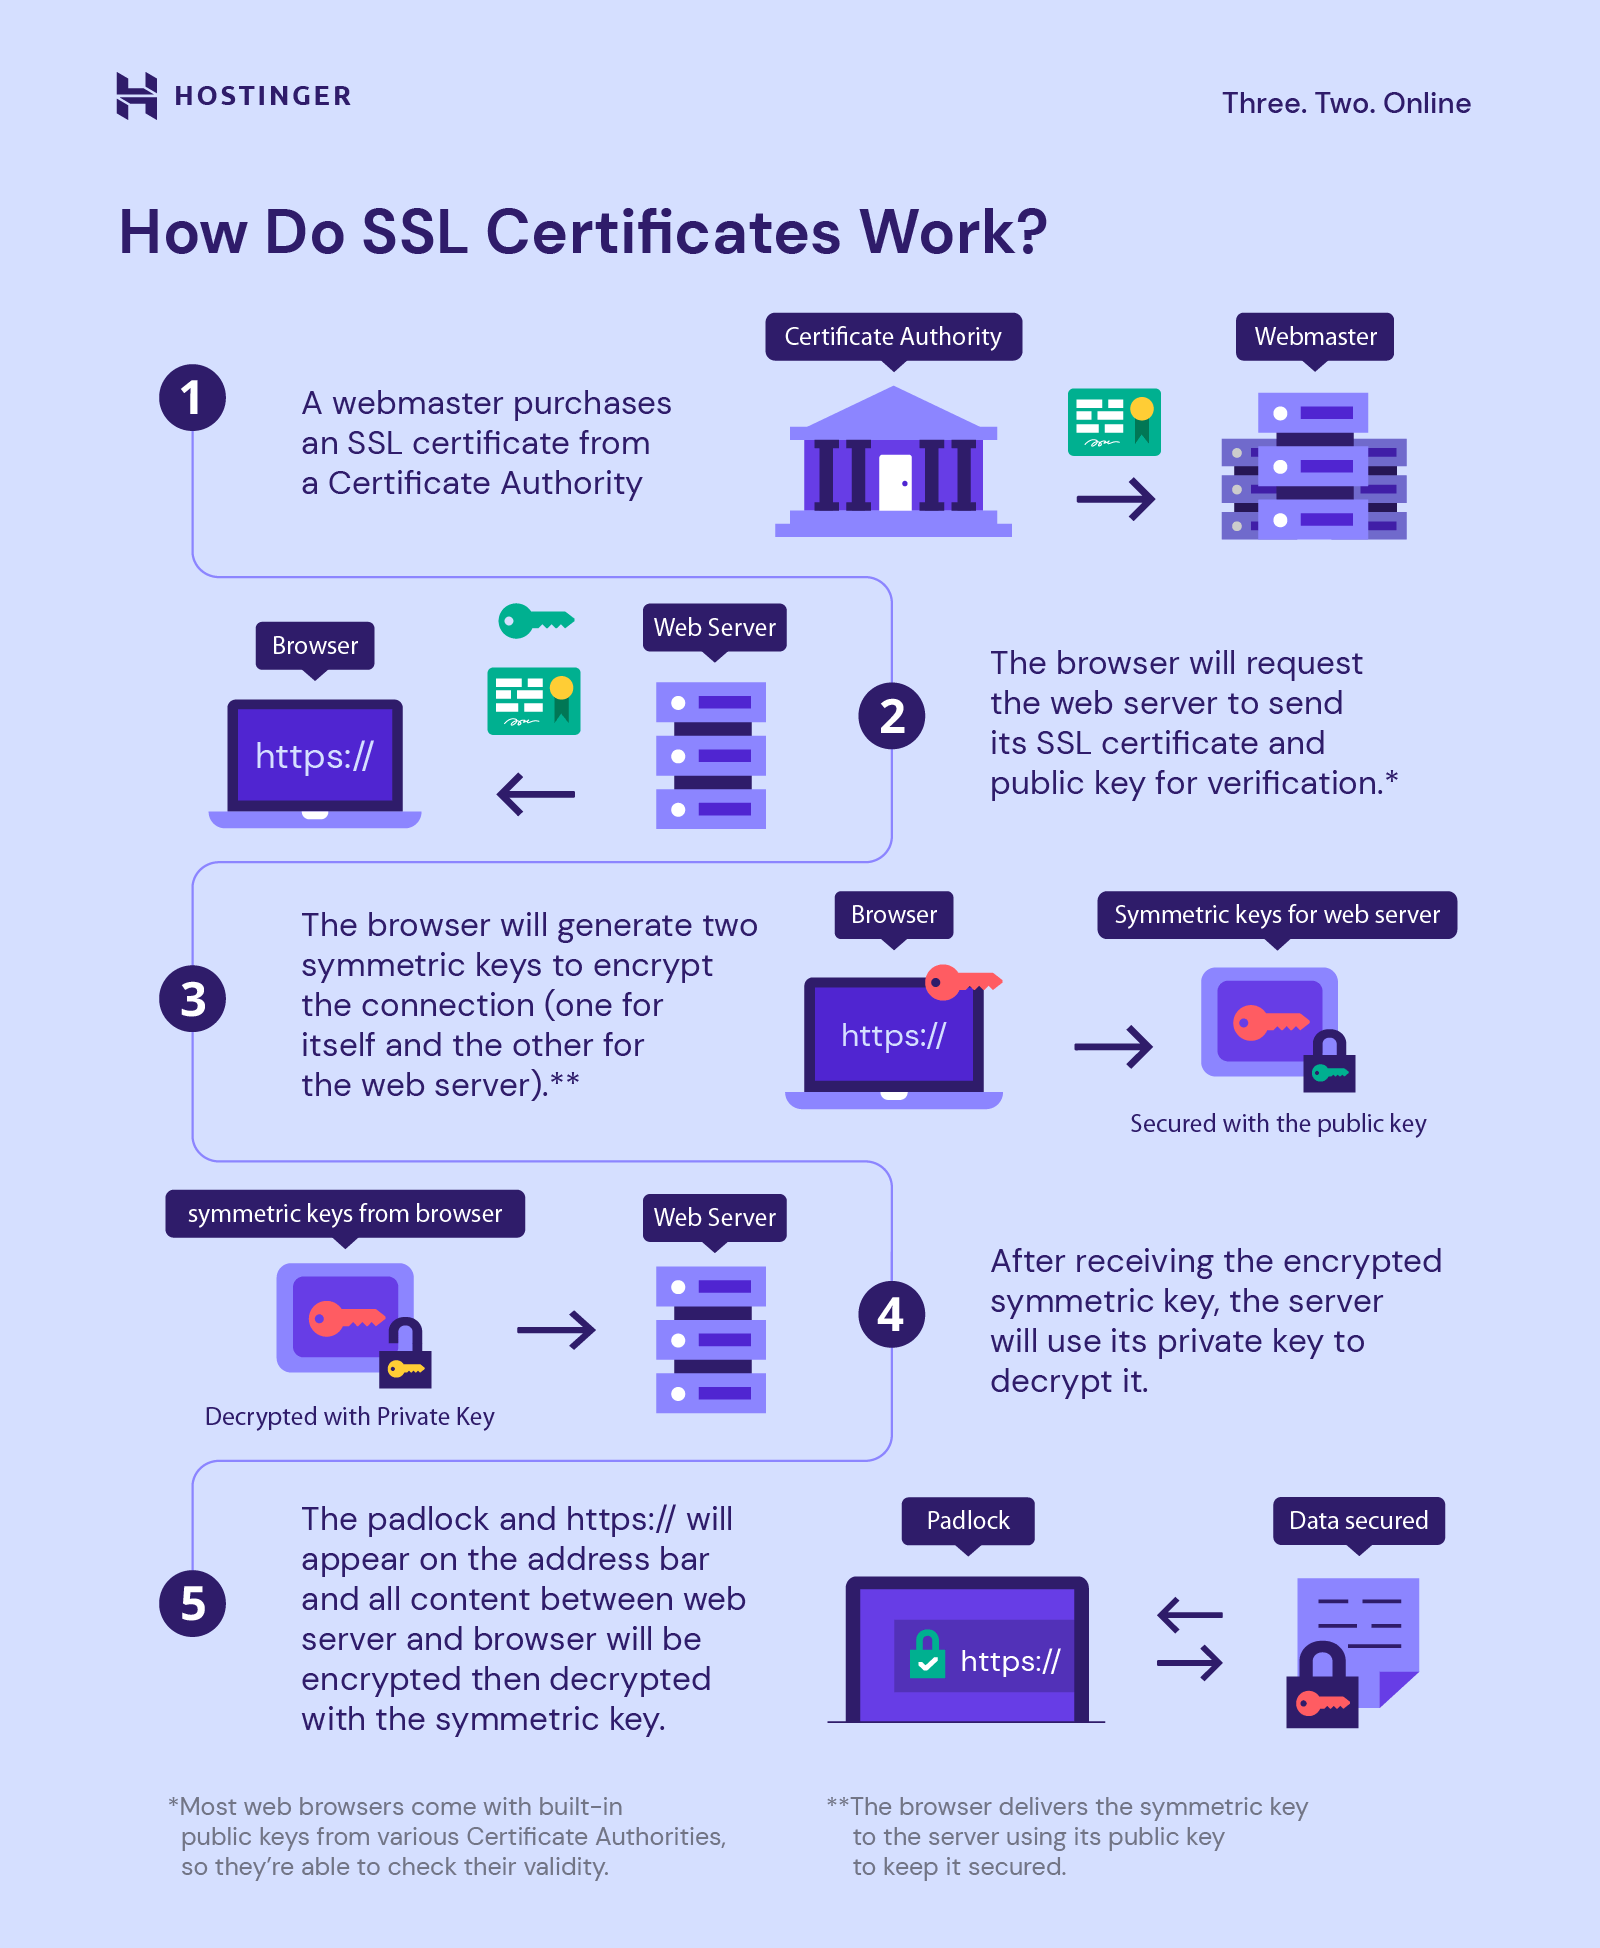 What can SSL prevent?